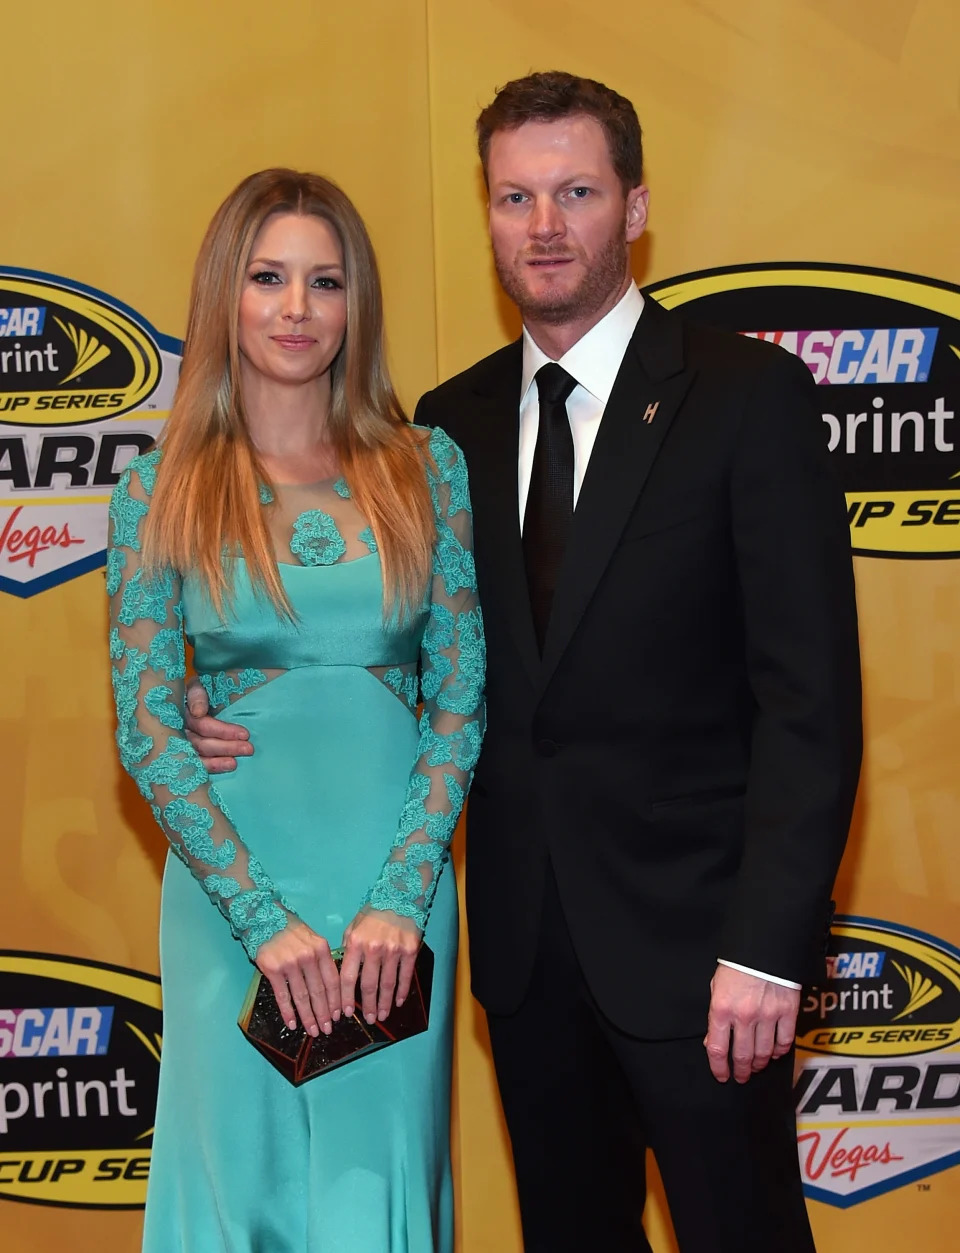 Inspiredlovers c61a56898166baaf00ddf4fc91df2196 She is part of one of the royal families: New secret about Amy Earnhardt, wife of NASCAR legend Dale Earnhardt Jr Exposed Sports  NASCAR News Dale Earnhardt Jr. 